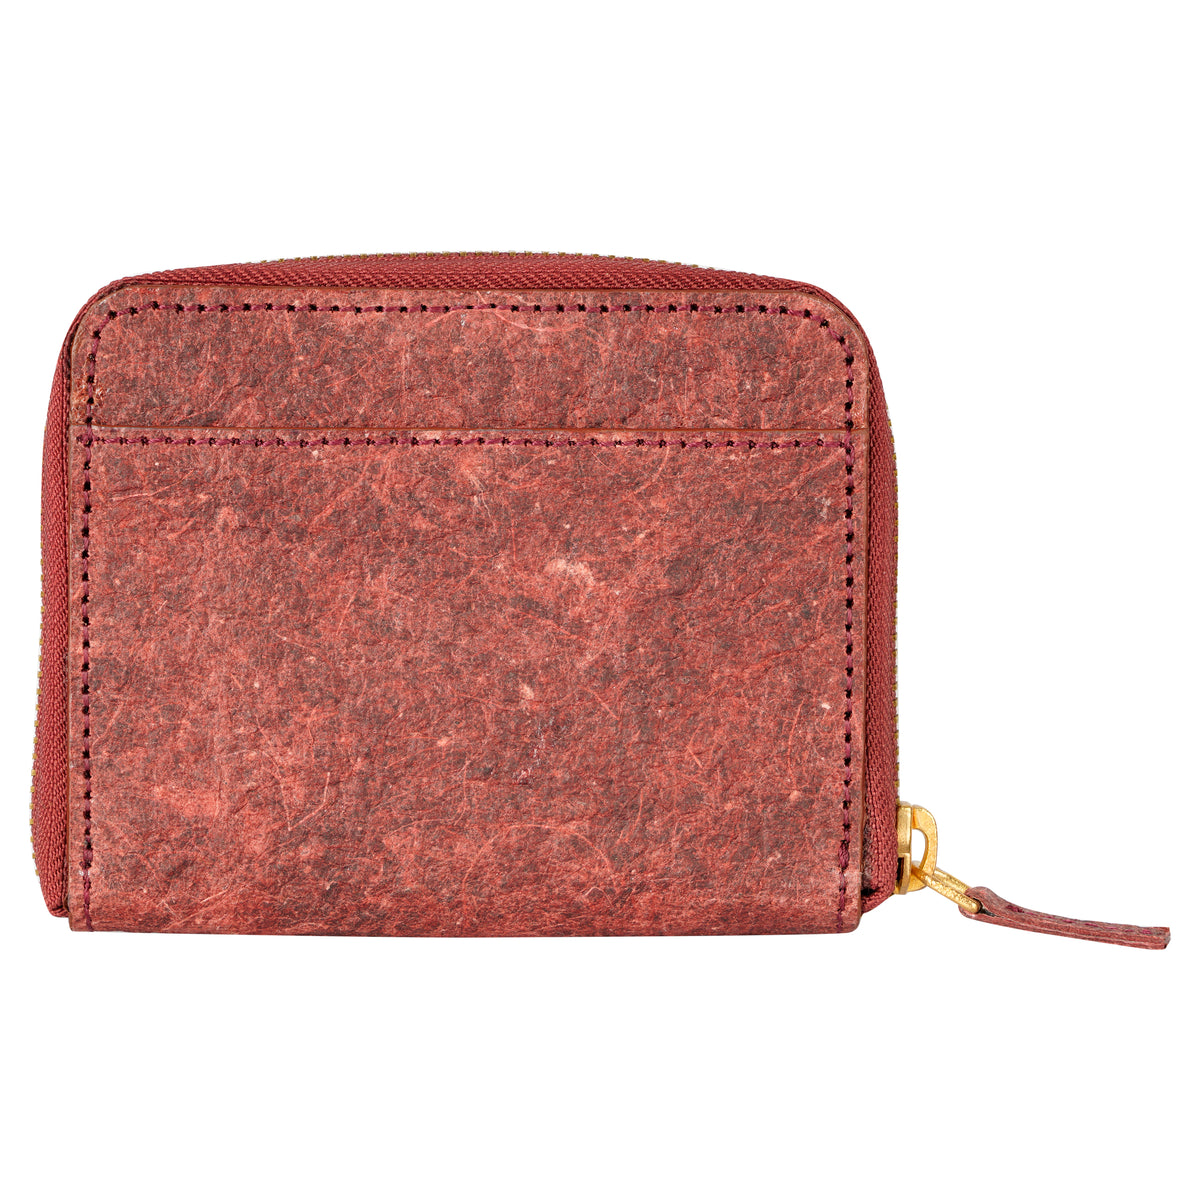 Coconut Leather Zip Pouch - Wine Red